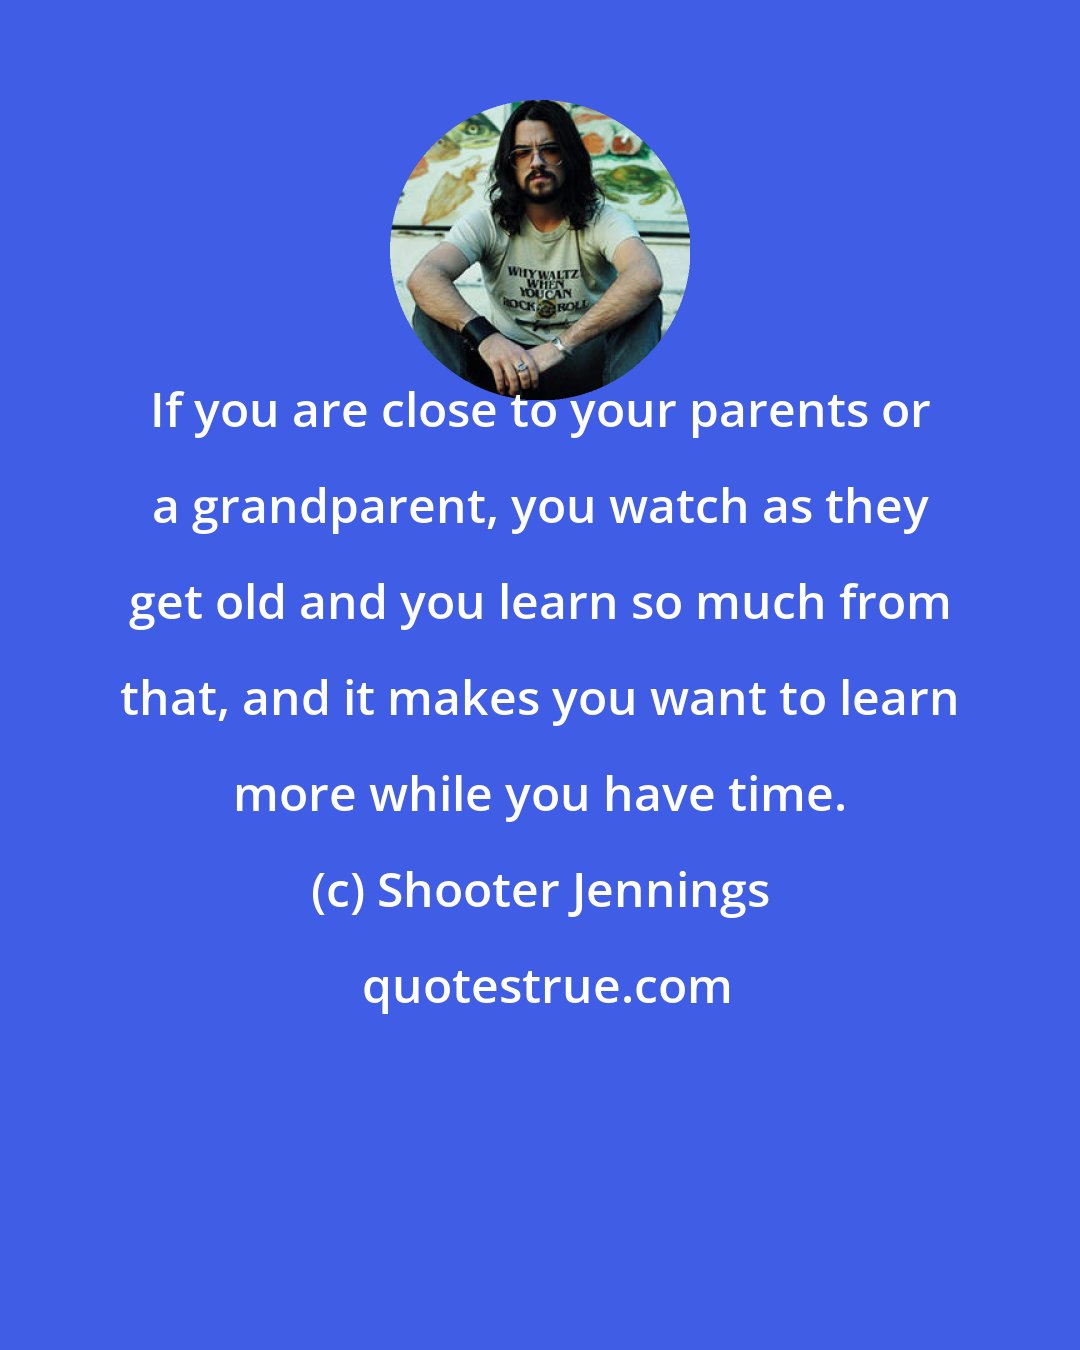 Shooter Jennings: If you are close to your parents or a grandparent, you watch as they get old and you learn so much from that, and it makes you want to learn more while you have time.